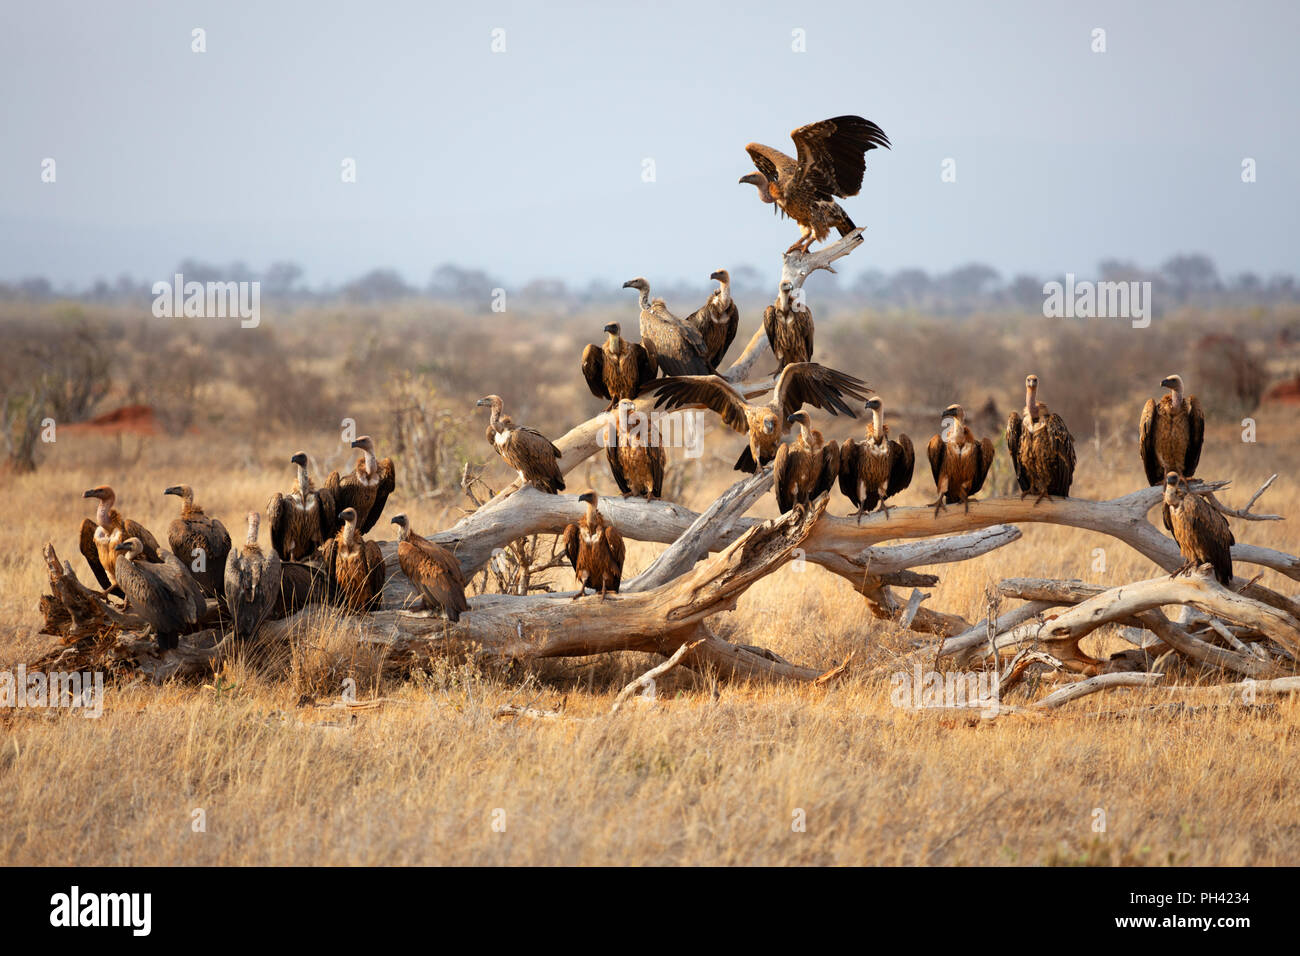 TSAVO EAST NATIONAL PARK, KENYA, AFRICA - A committee or flock of vultures perched on a dead tree branch in late afternoon sun Stock Photo